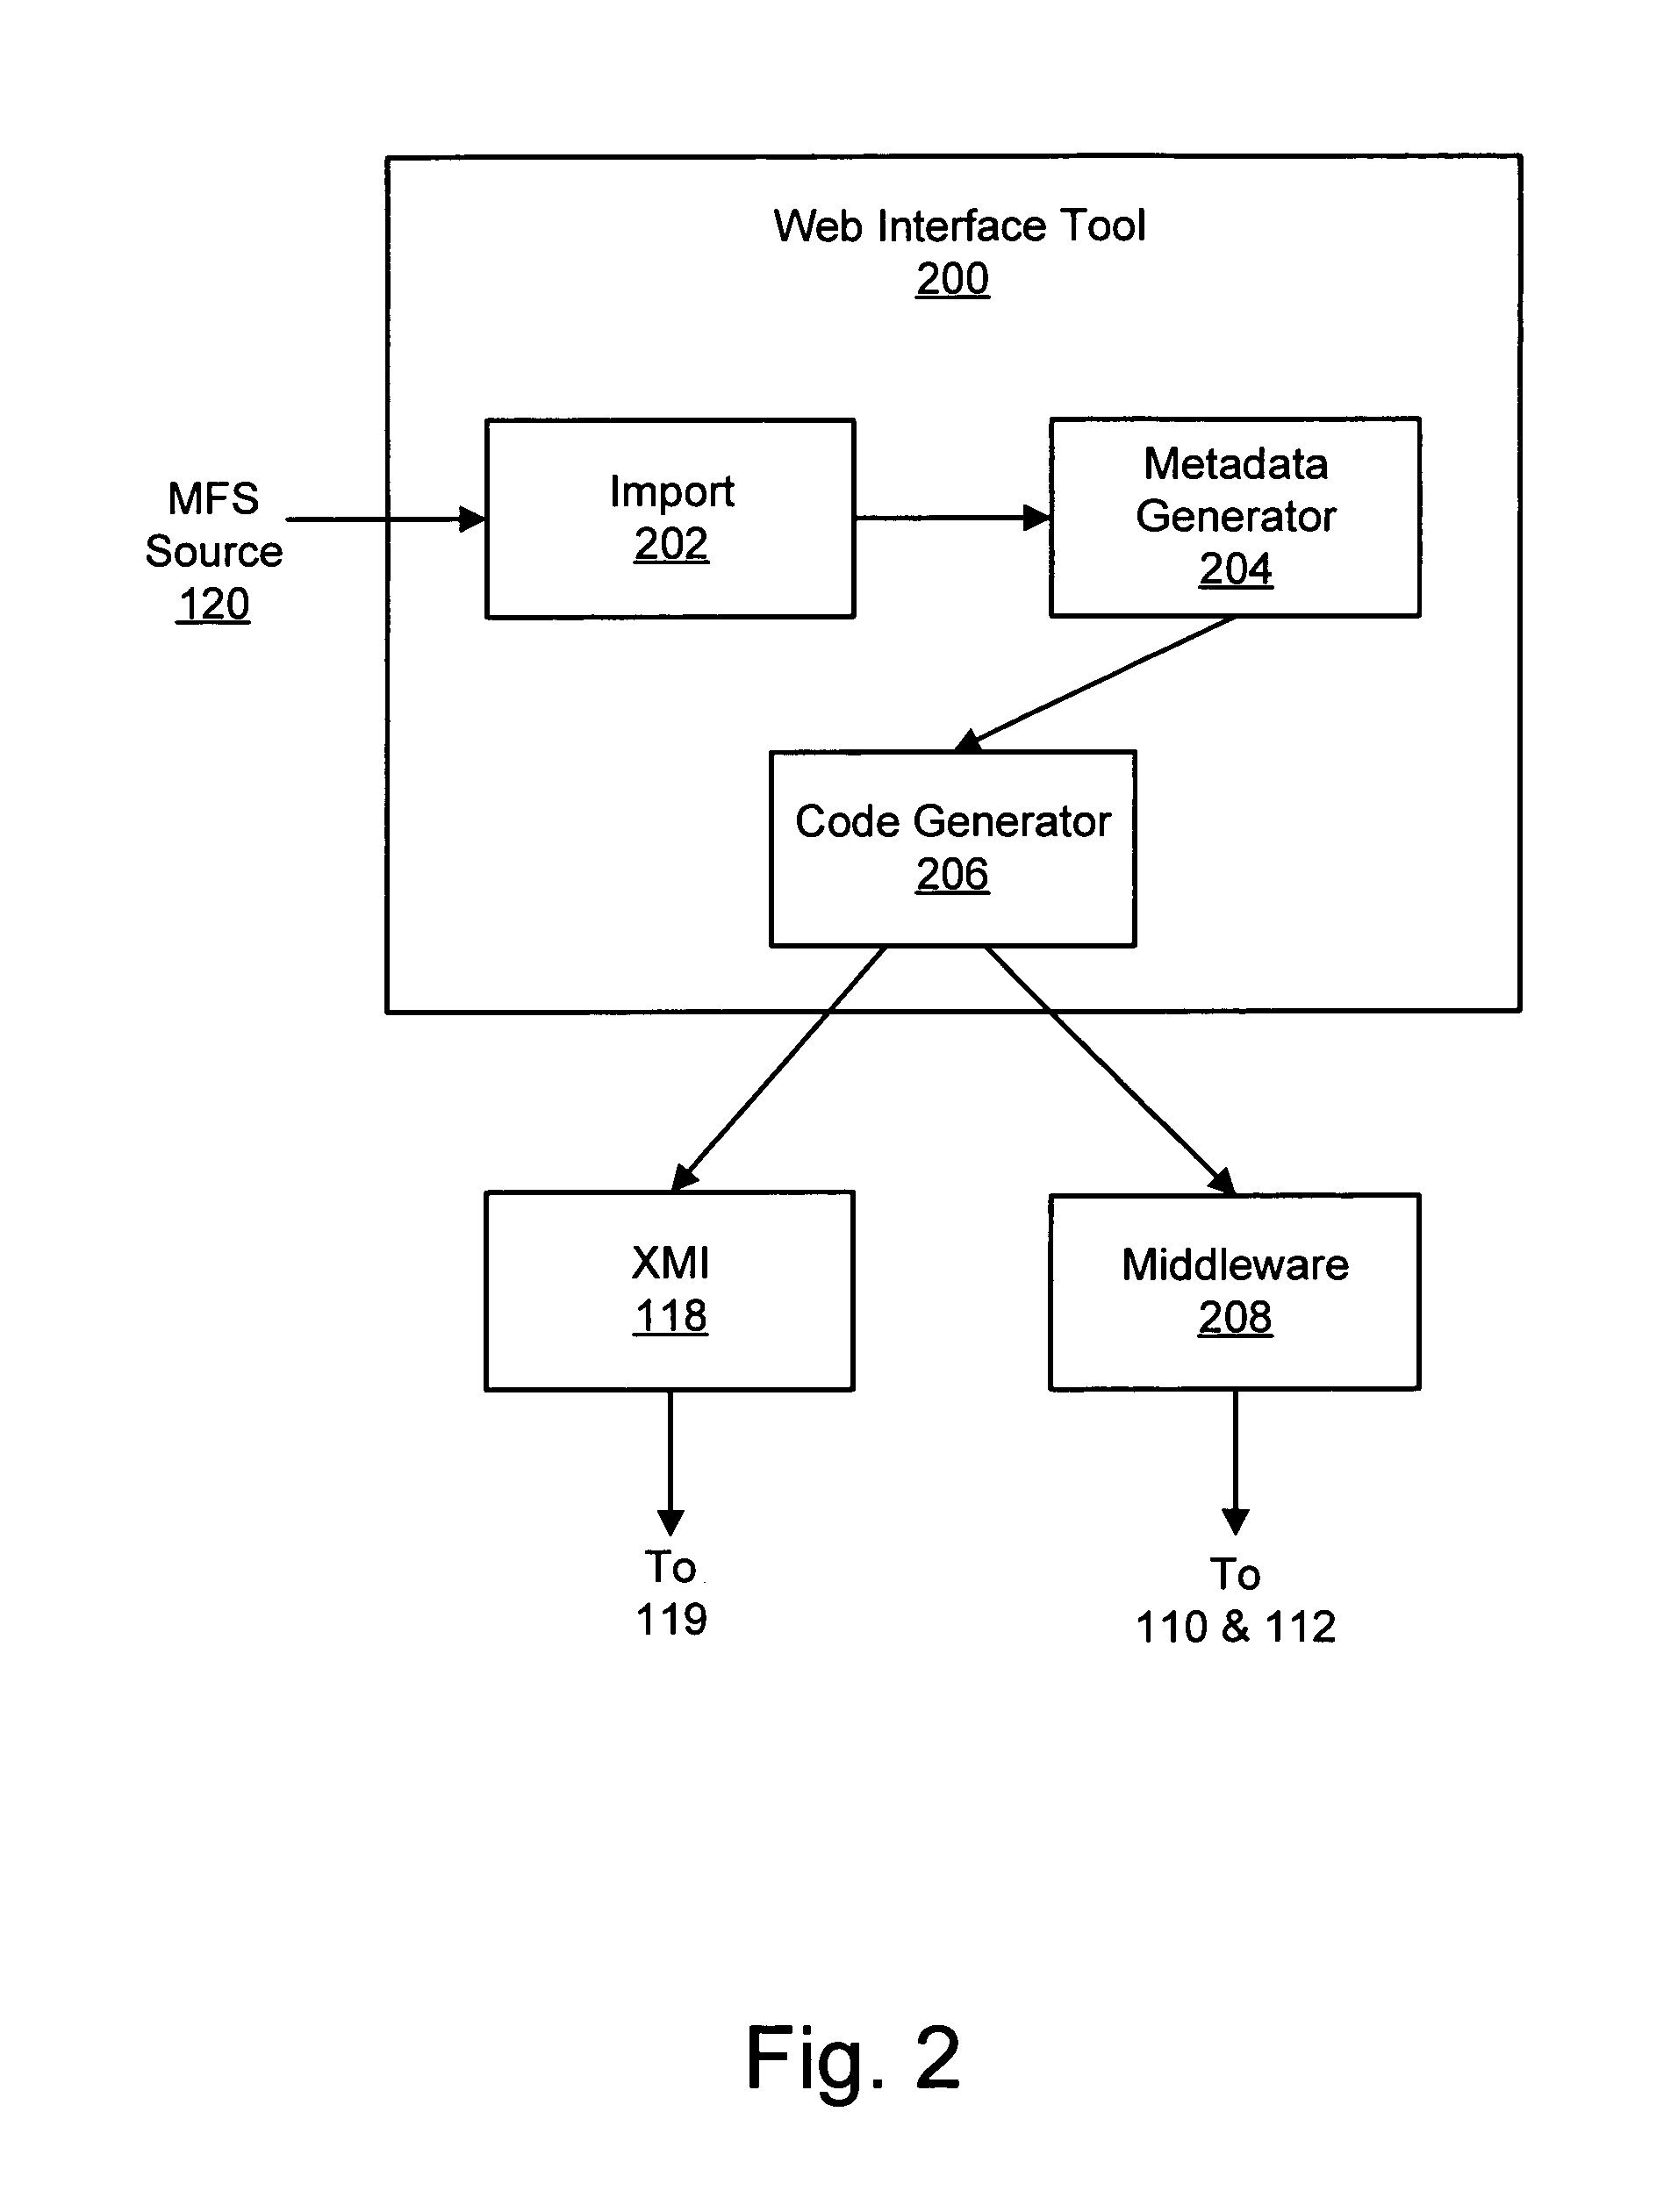 Apparatus, system, and method for automatically generating a web interface for an MFS-based IMS application